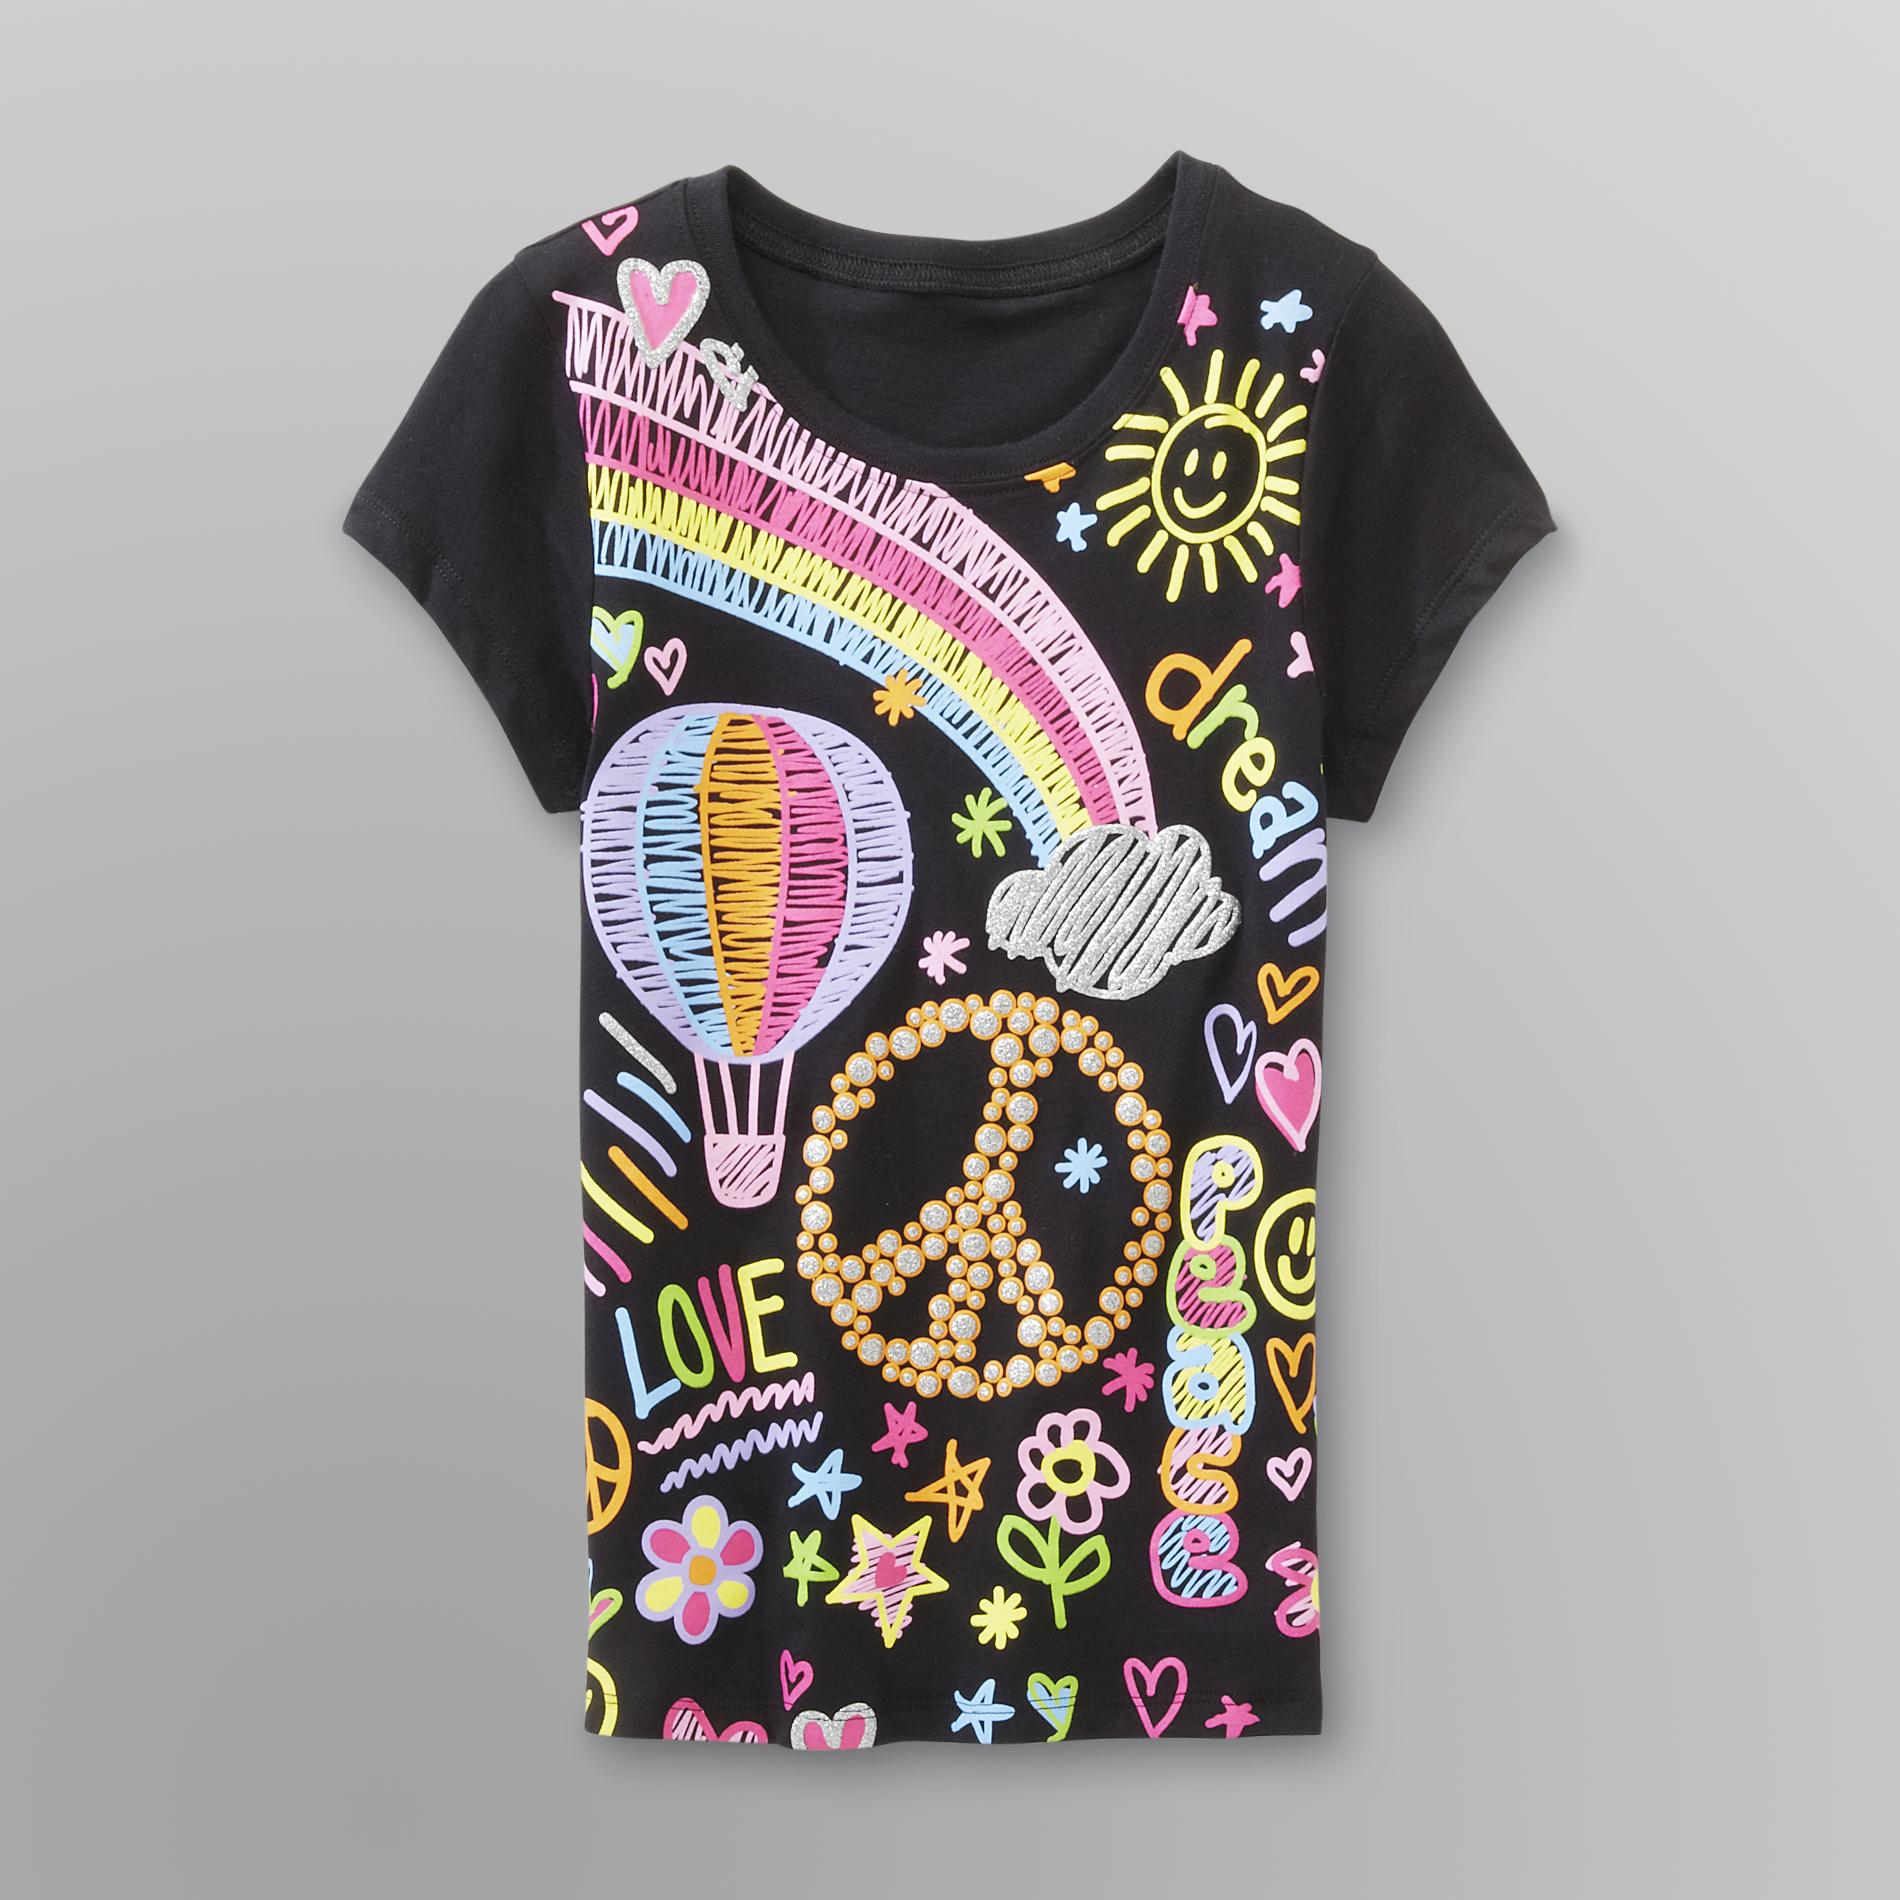 Route 66 Girl's Graphic T-Shirt - Rainbow Doodle